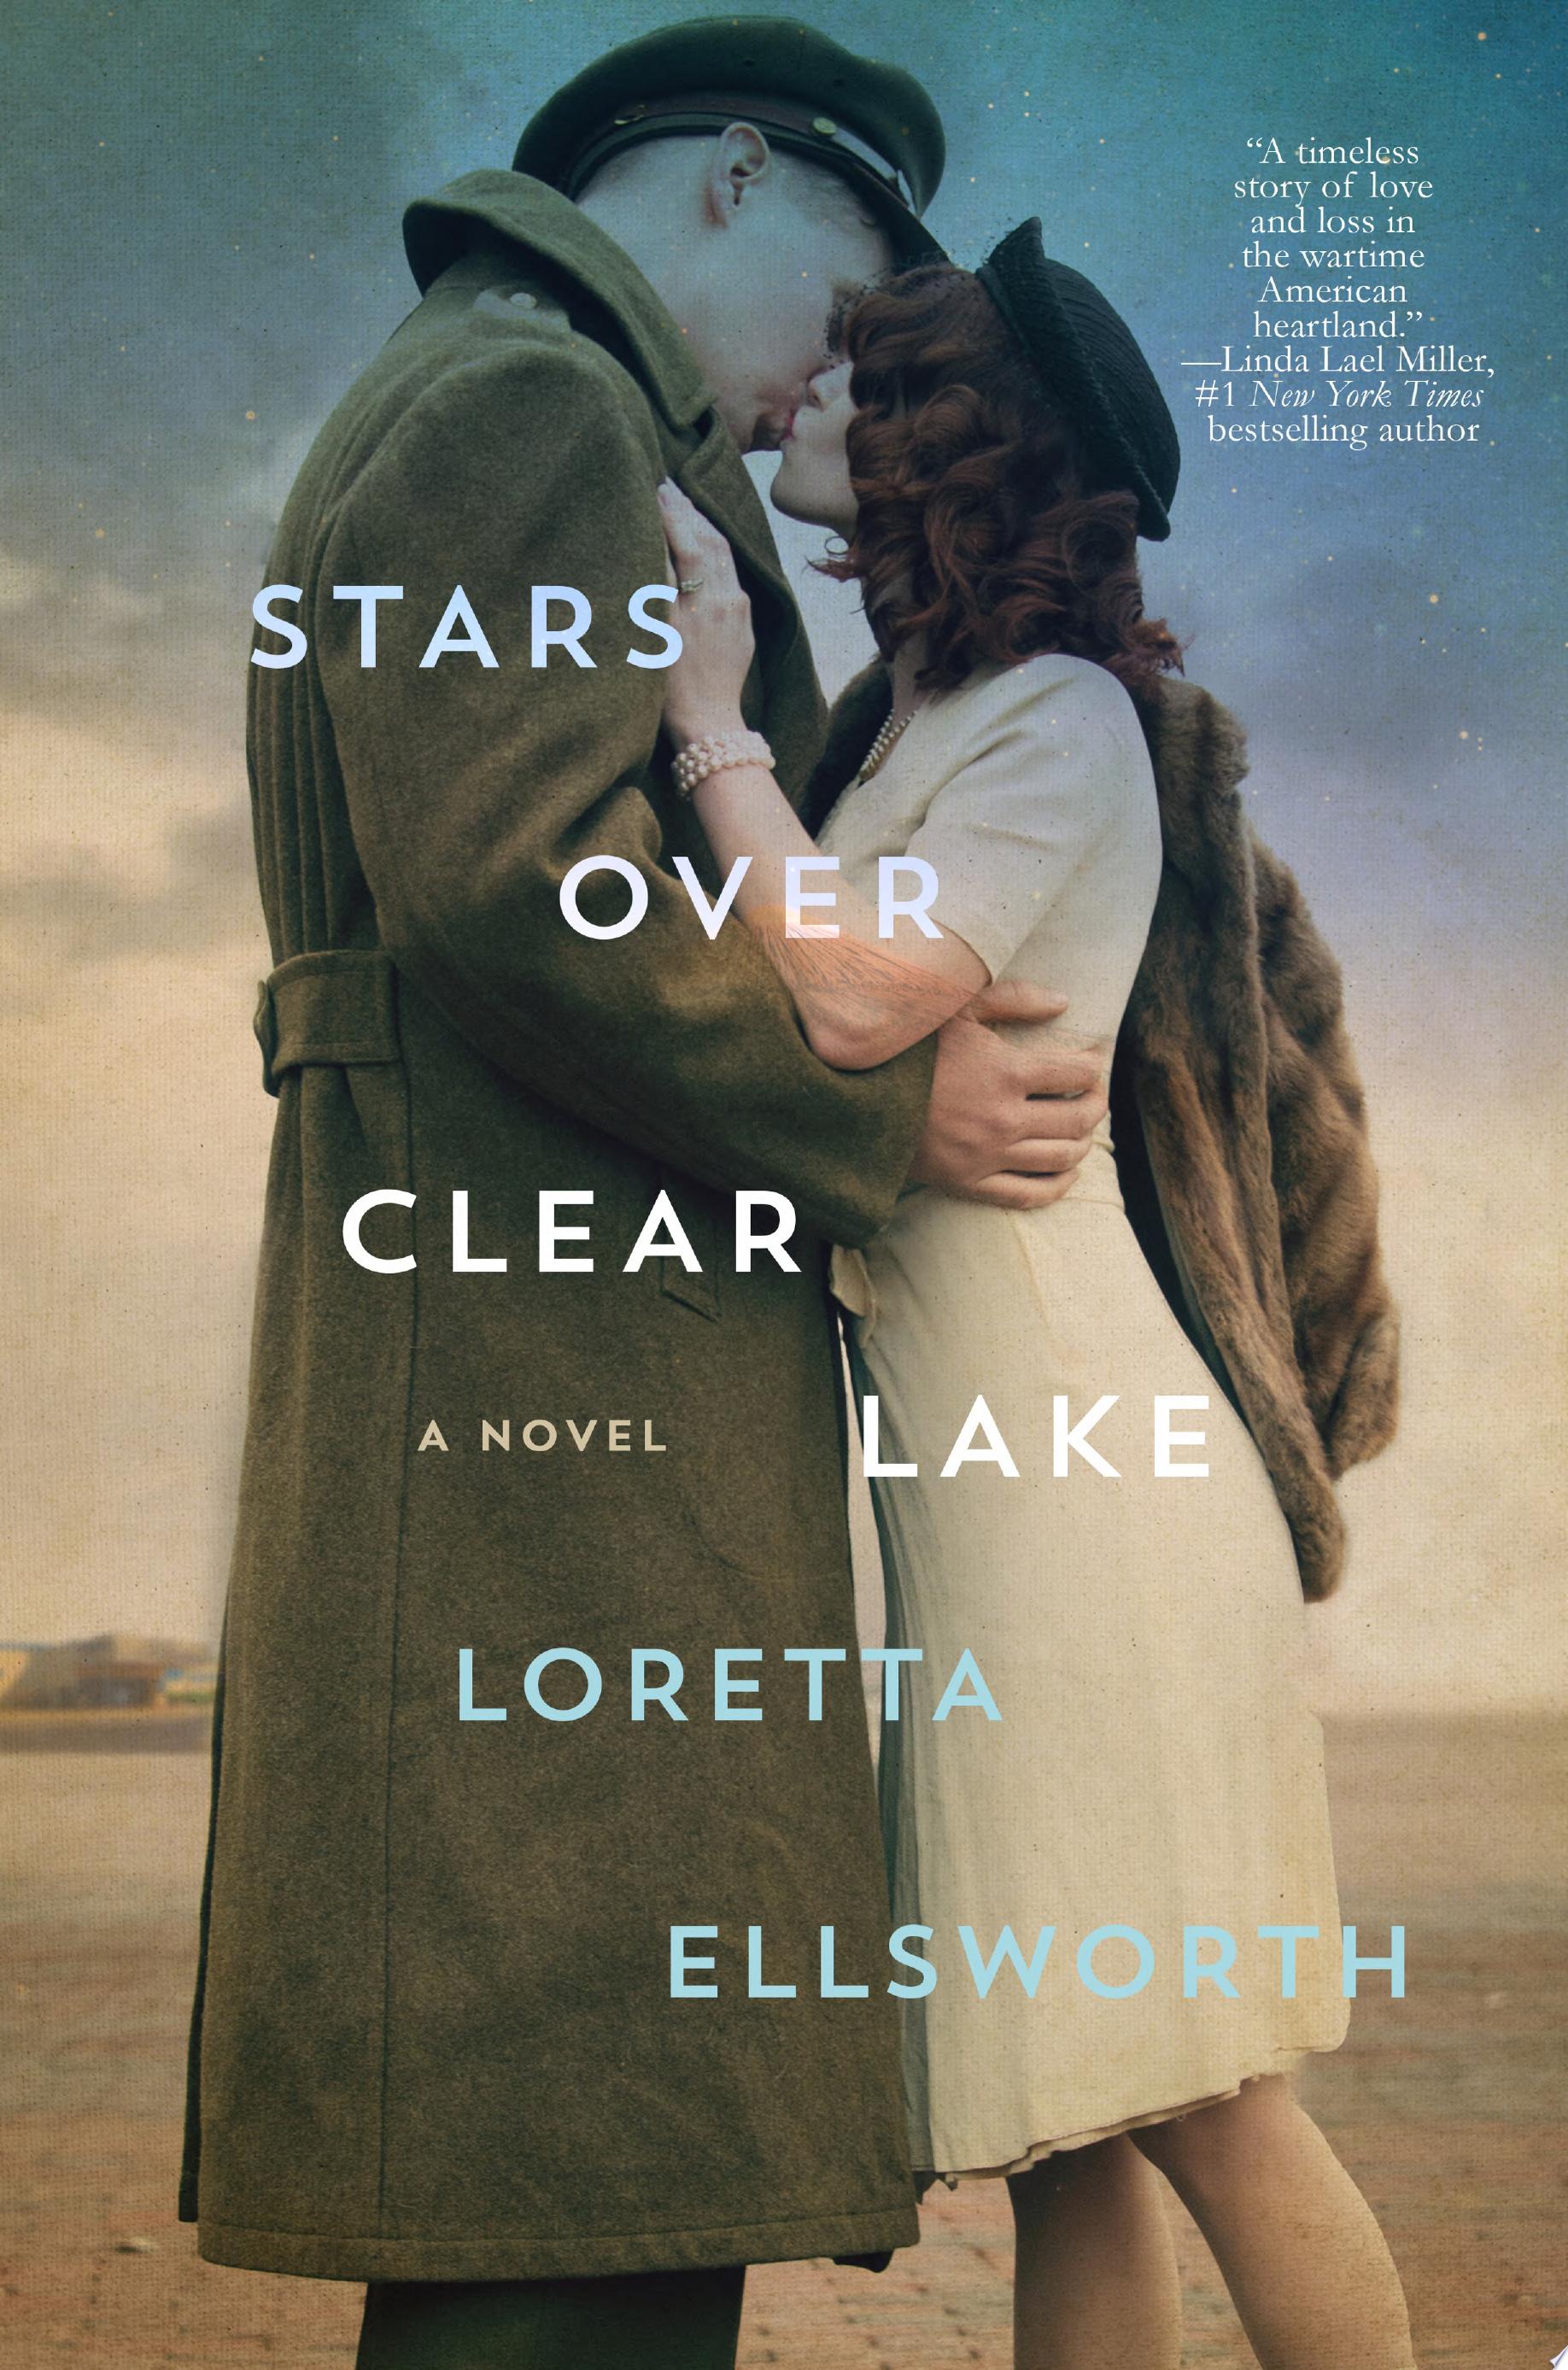 Image for "Stars Over Clear Lake"